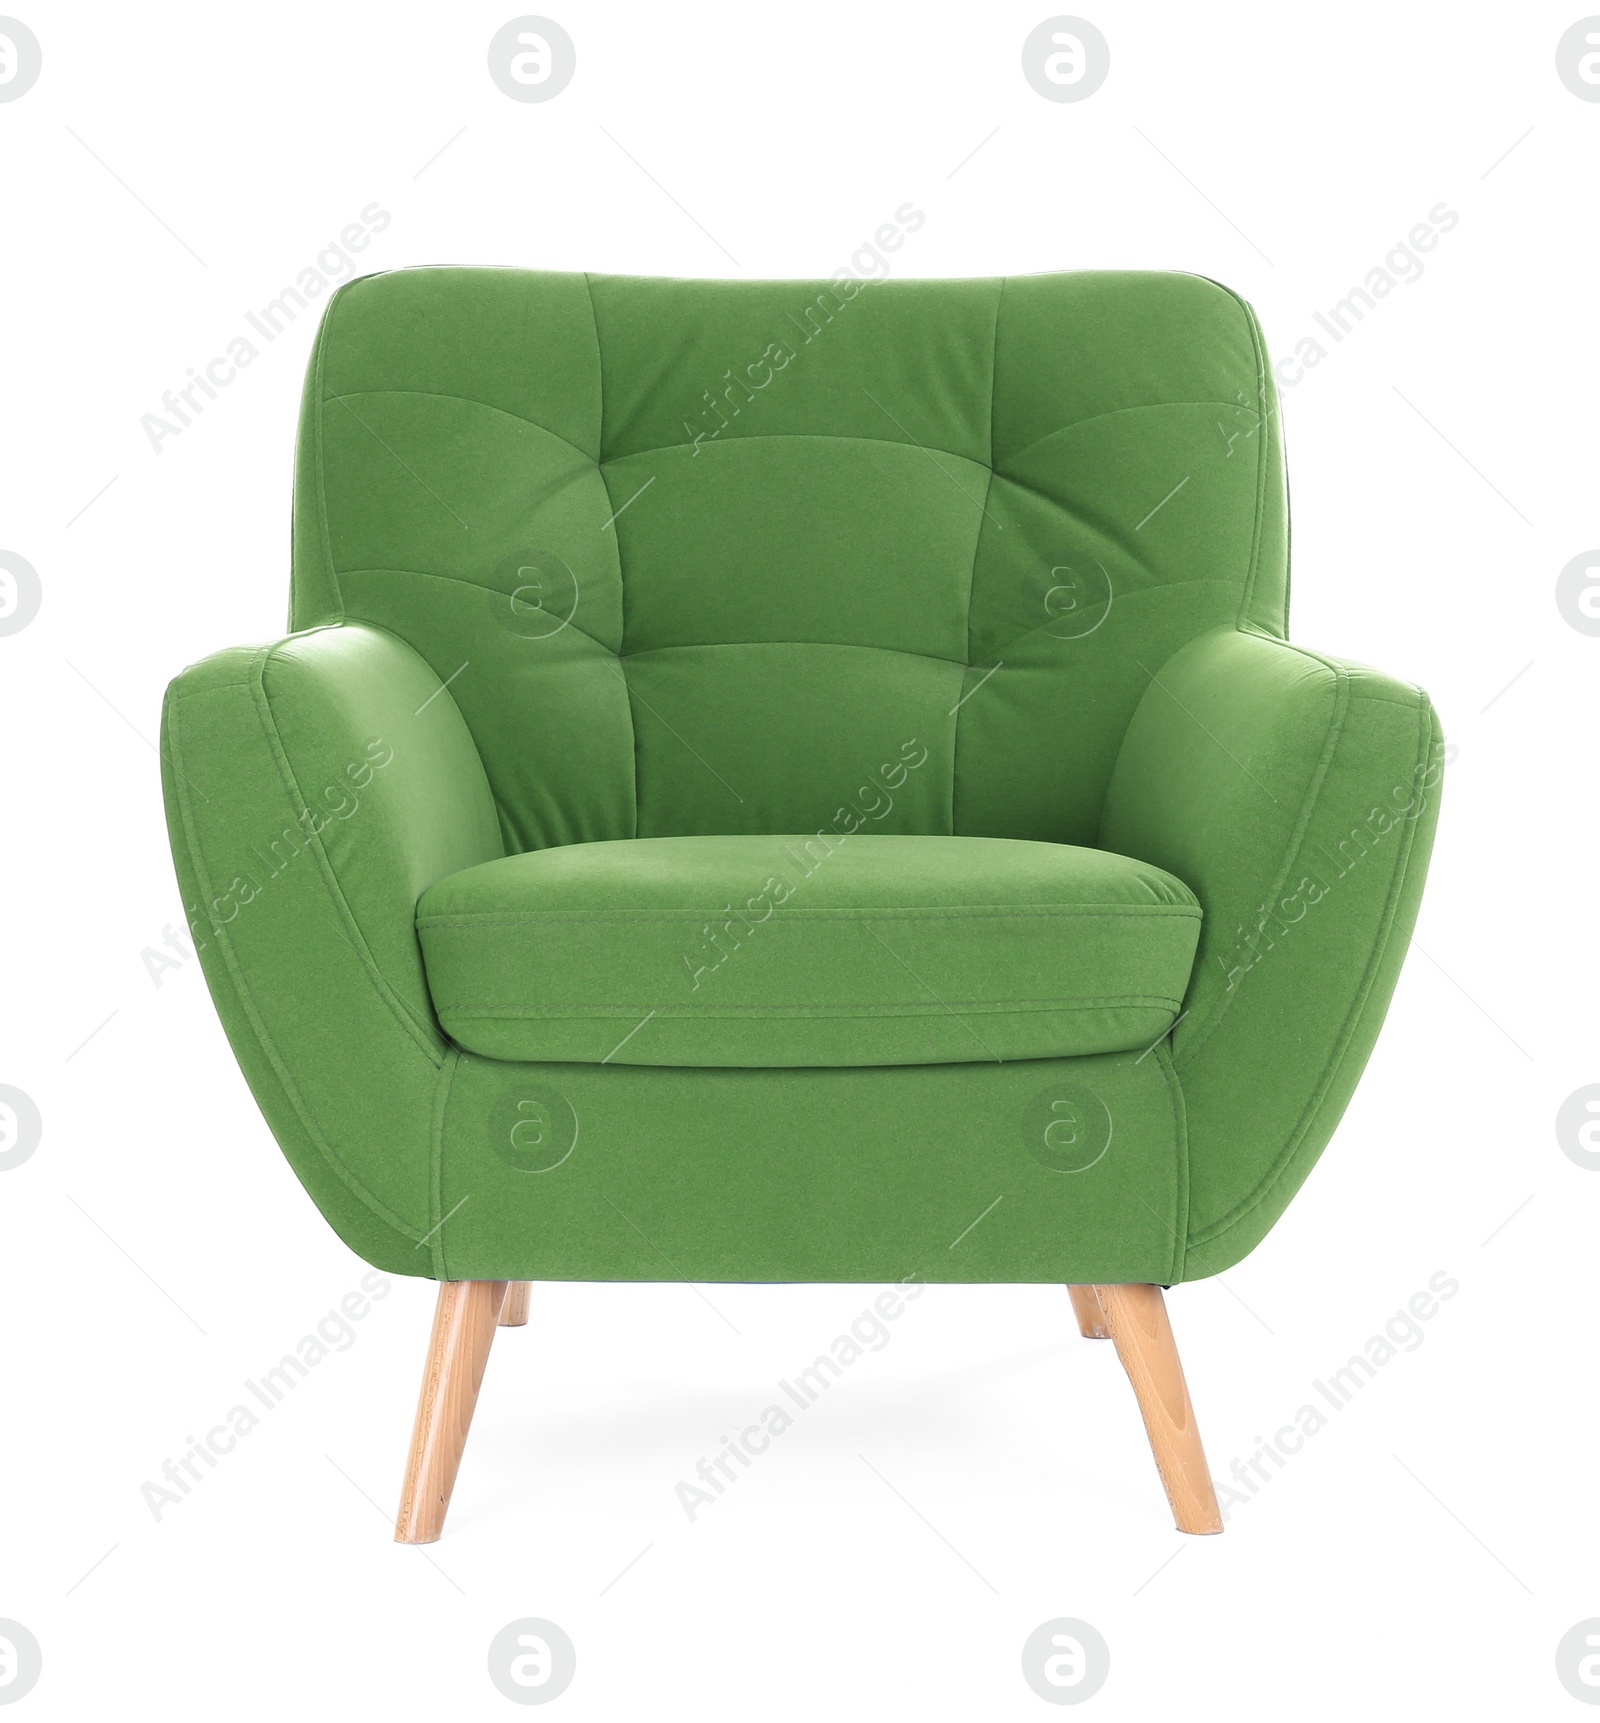 Image of One comfortable green armchair isolated on white